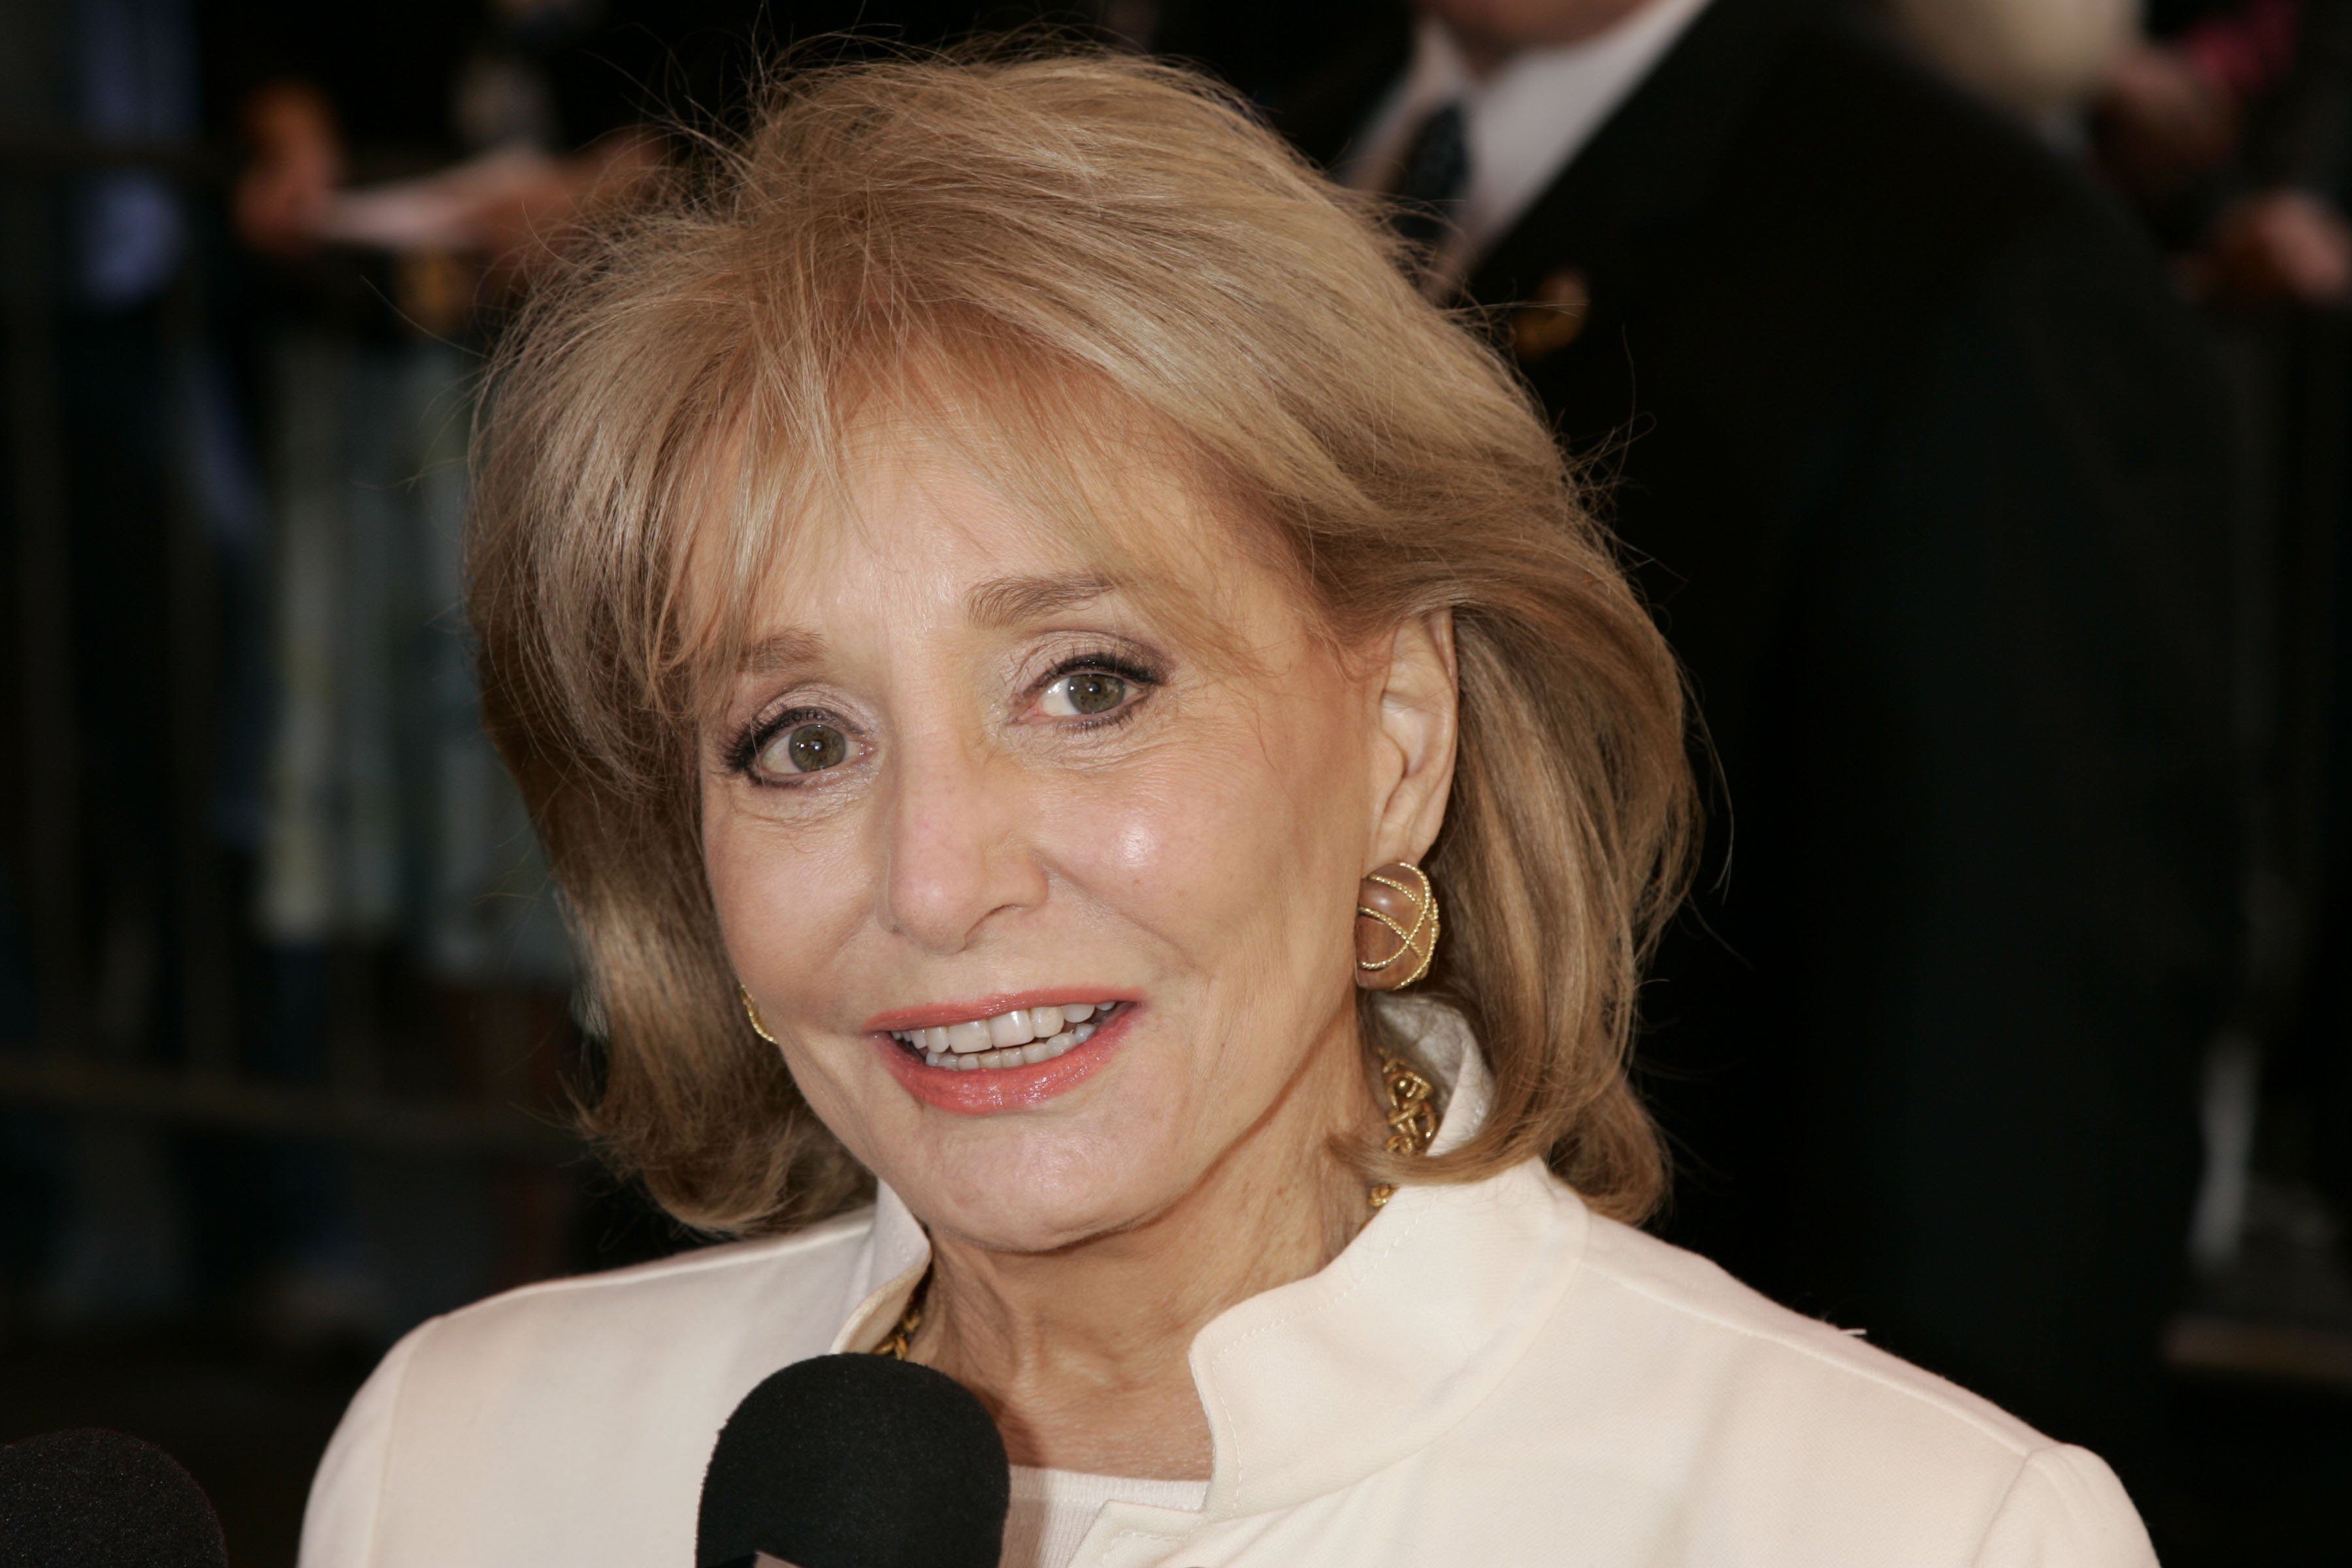 Barbara Walters arrives at the New Amsterdam theater for the Dana Reeve Memorial Service April 10, 2006 in New York City | Source: Getty Images